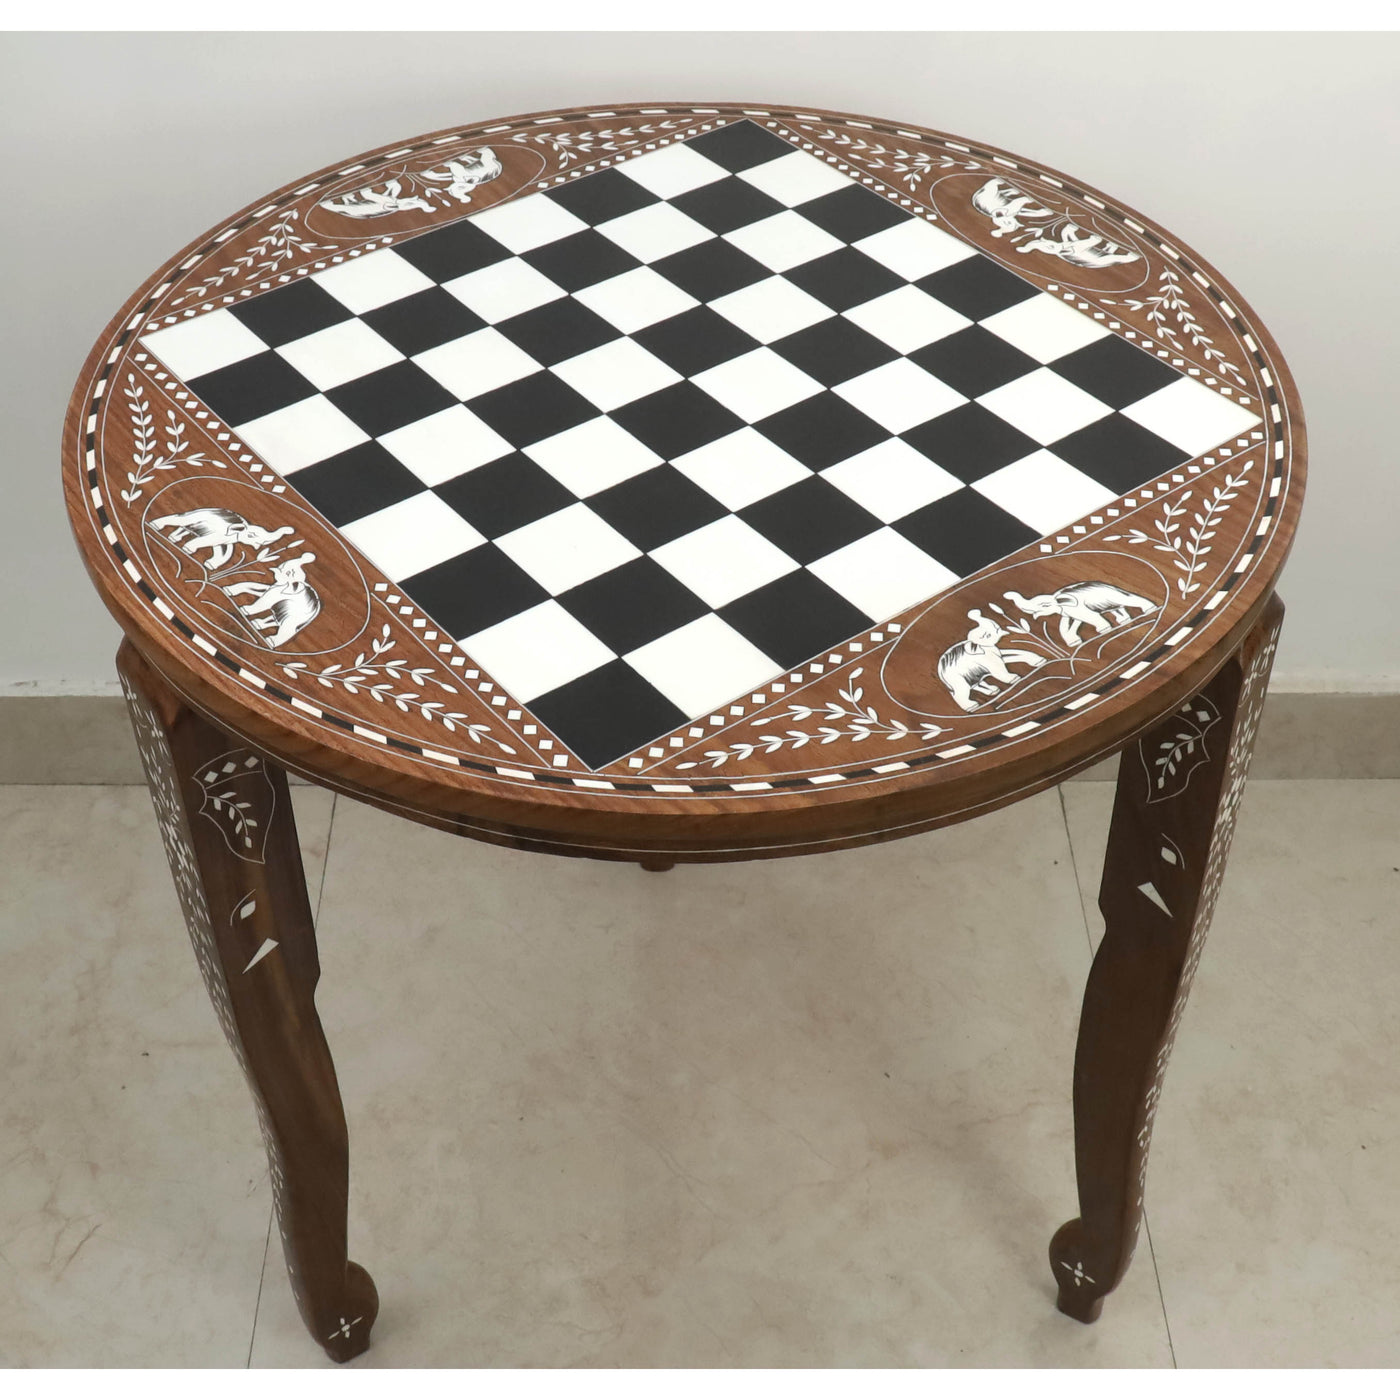 24" Boutique Luxury Round Chess Board Table -25" High- Golden Rosewood & Acrylic